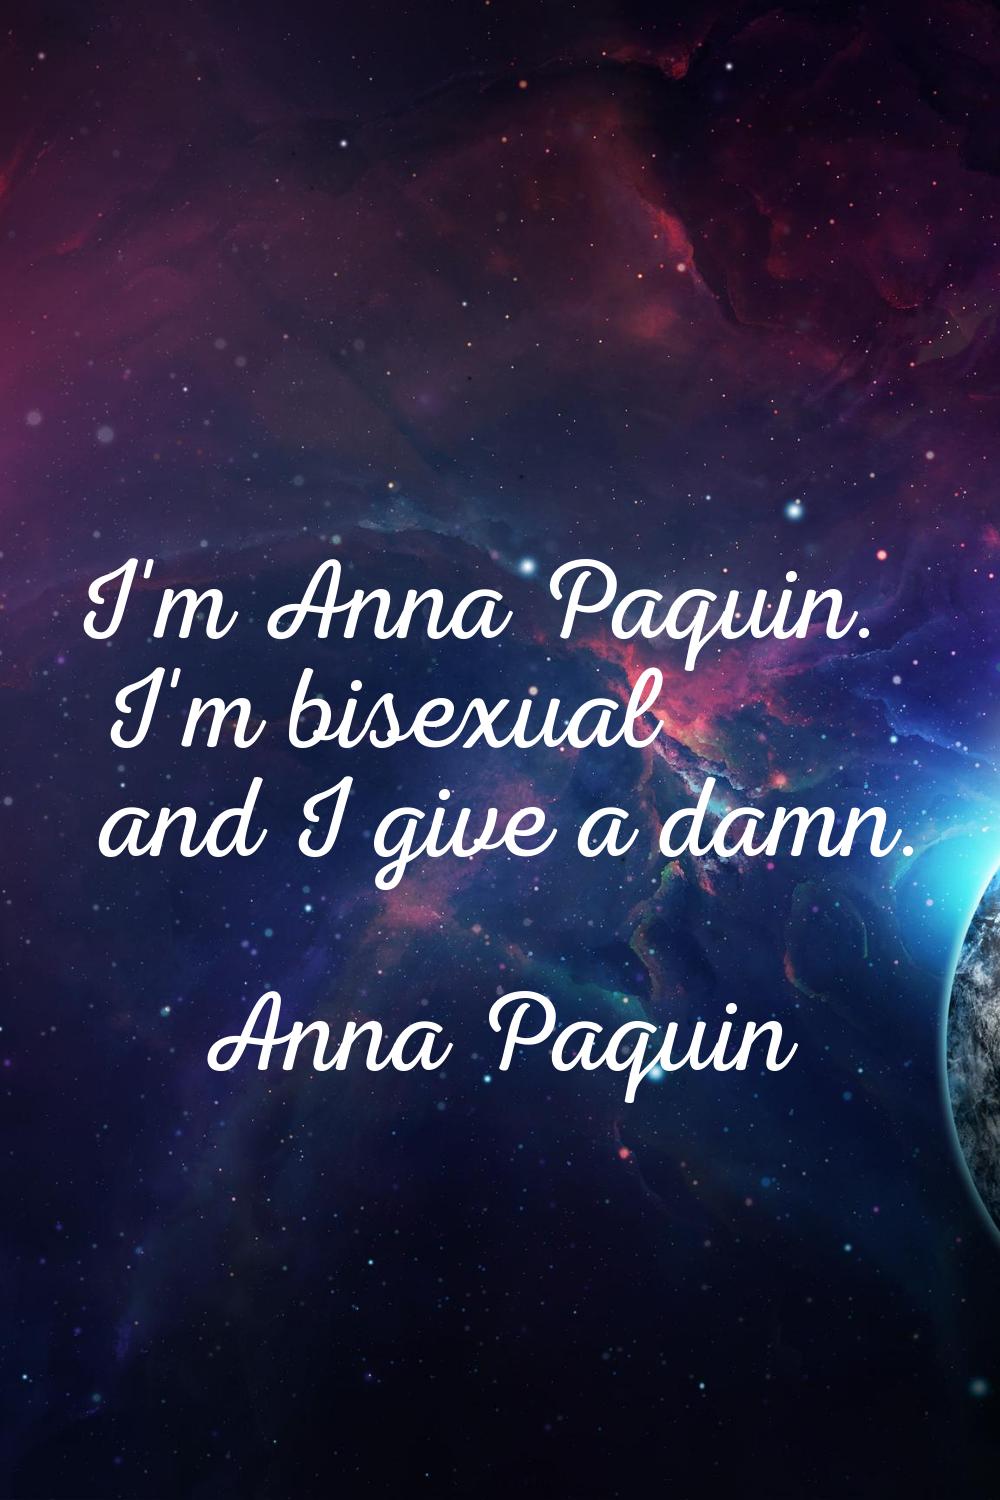 I'm Anna Paquin. I'm bisexual and I give a damn.